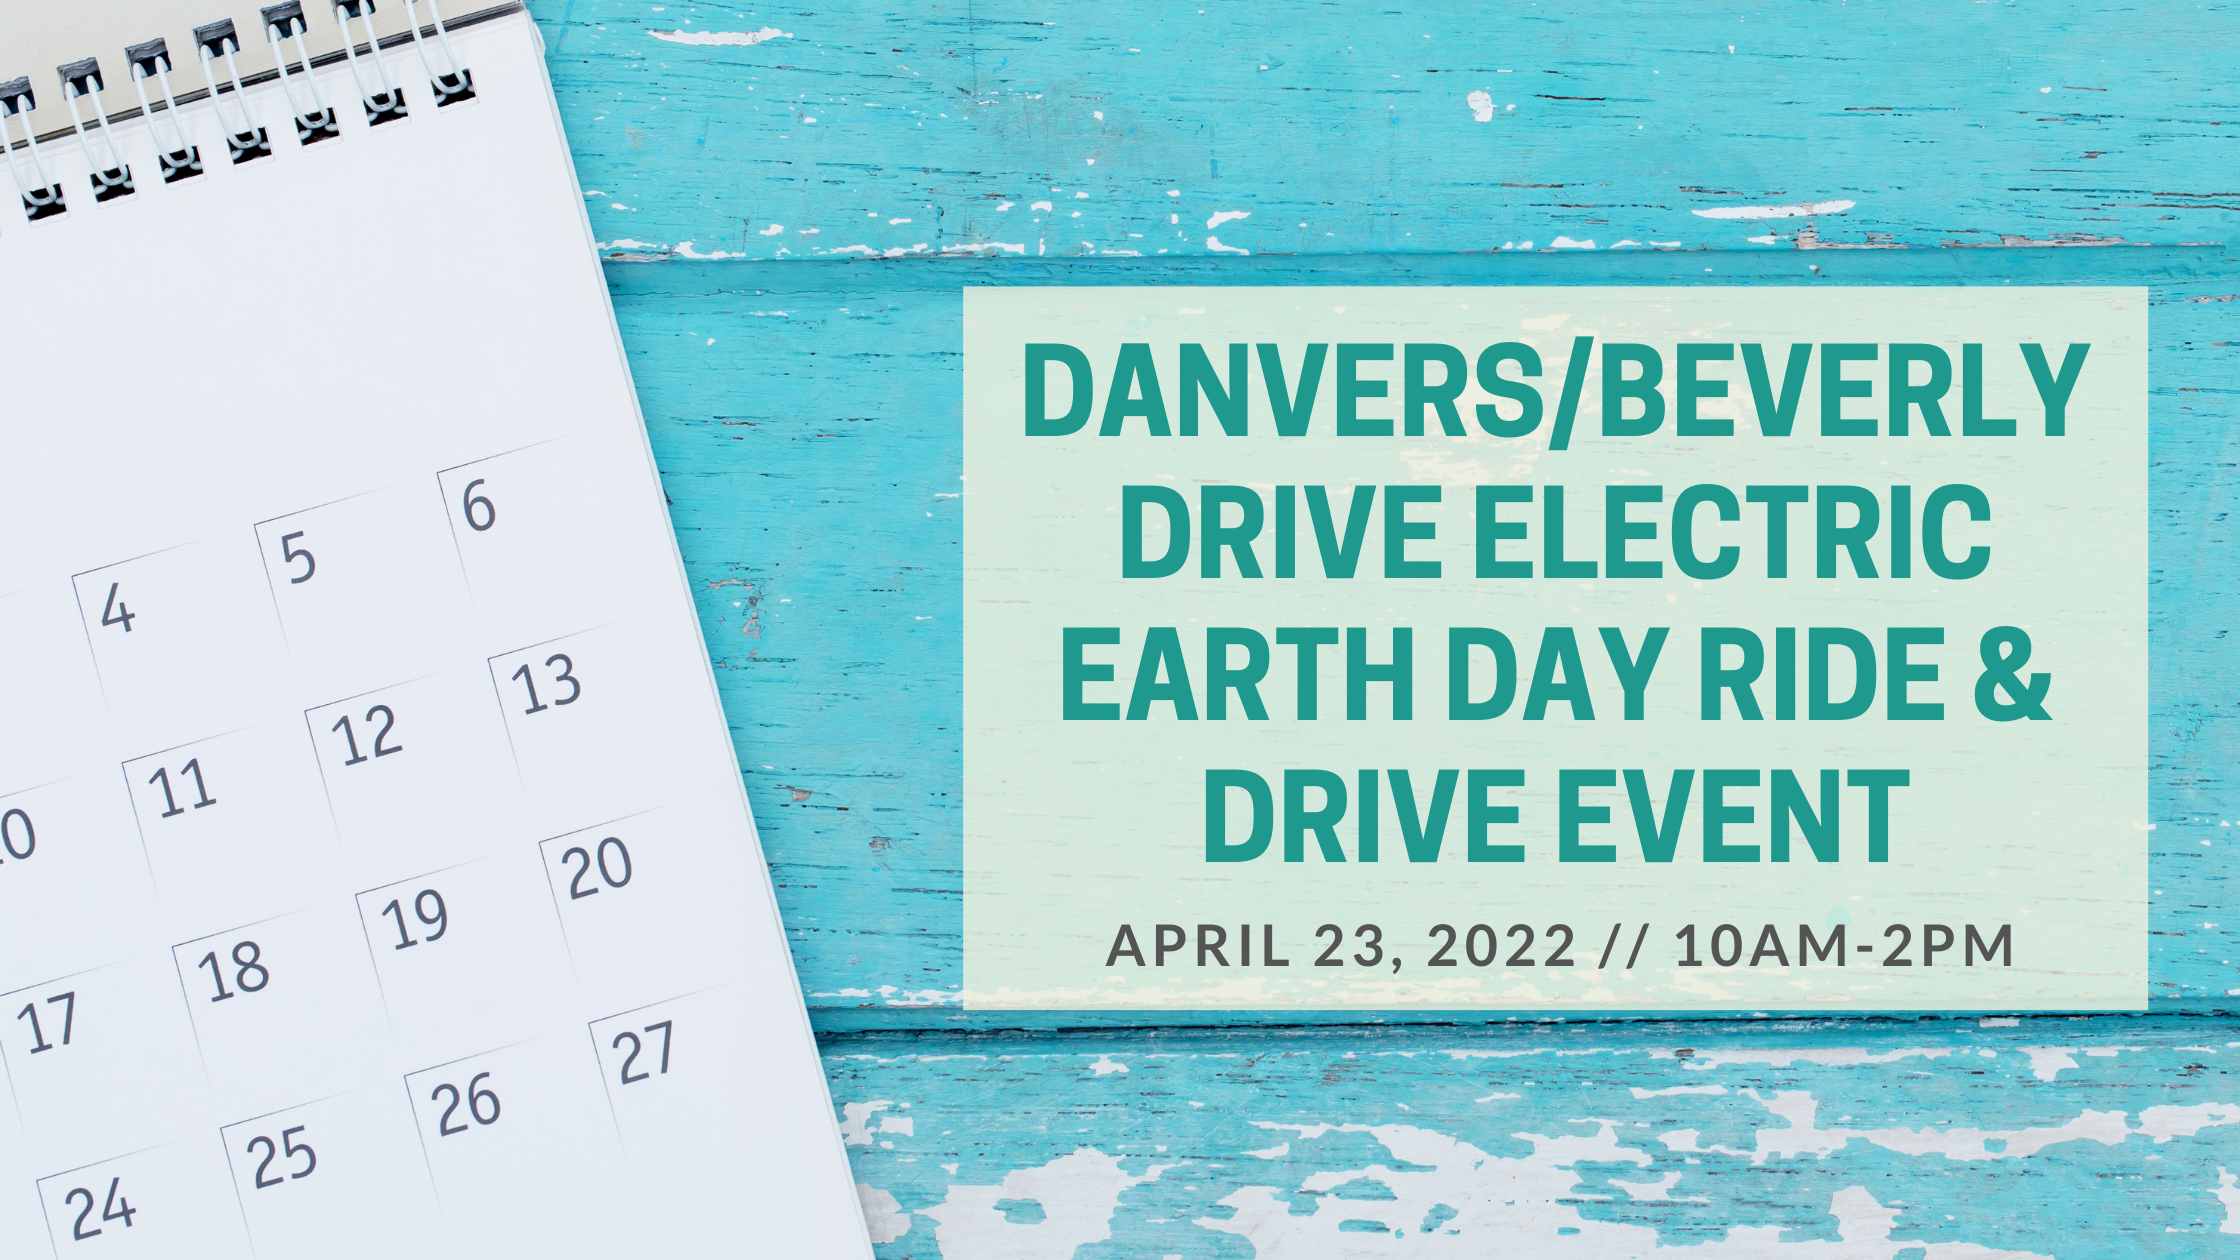 Danvers/Beverly Drive Electric Earth Day Ride & Drive EVent